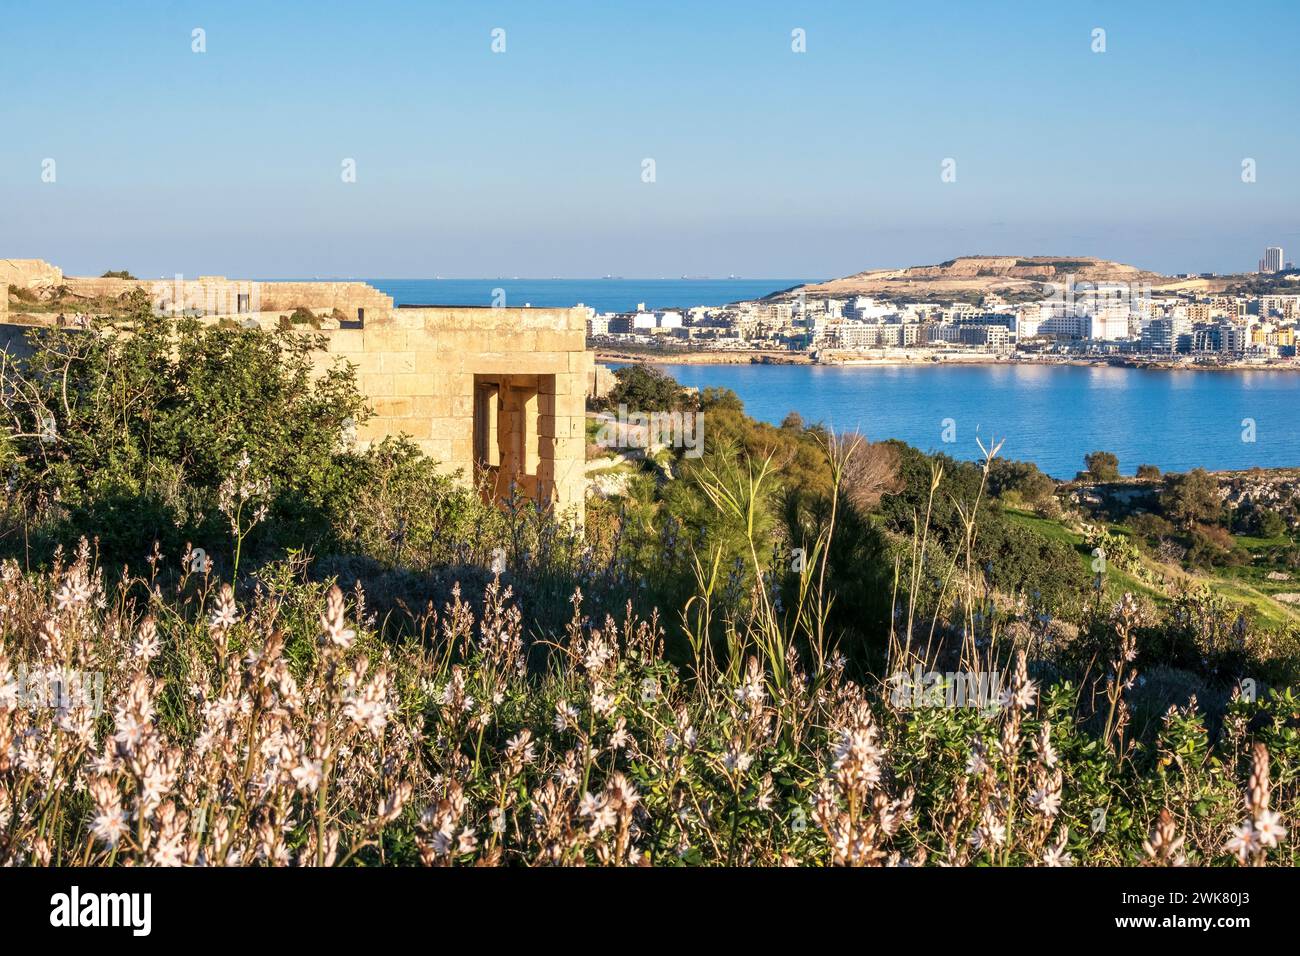 View from Fort Campbell, a World War II-era British Army battery overlooking St. Paul's Bay, Malta Stock Photo